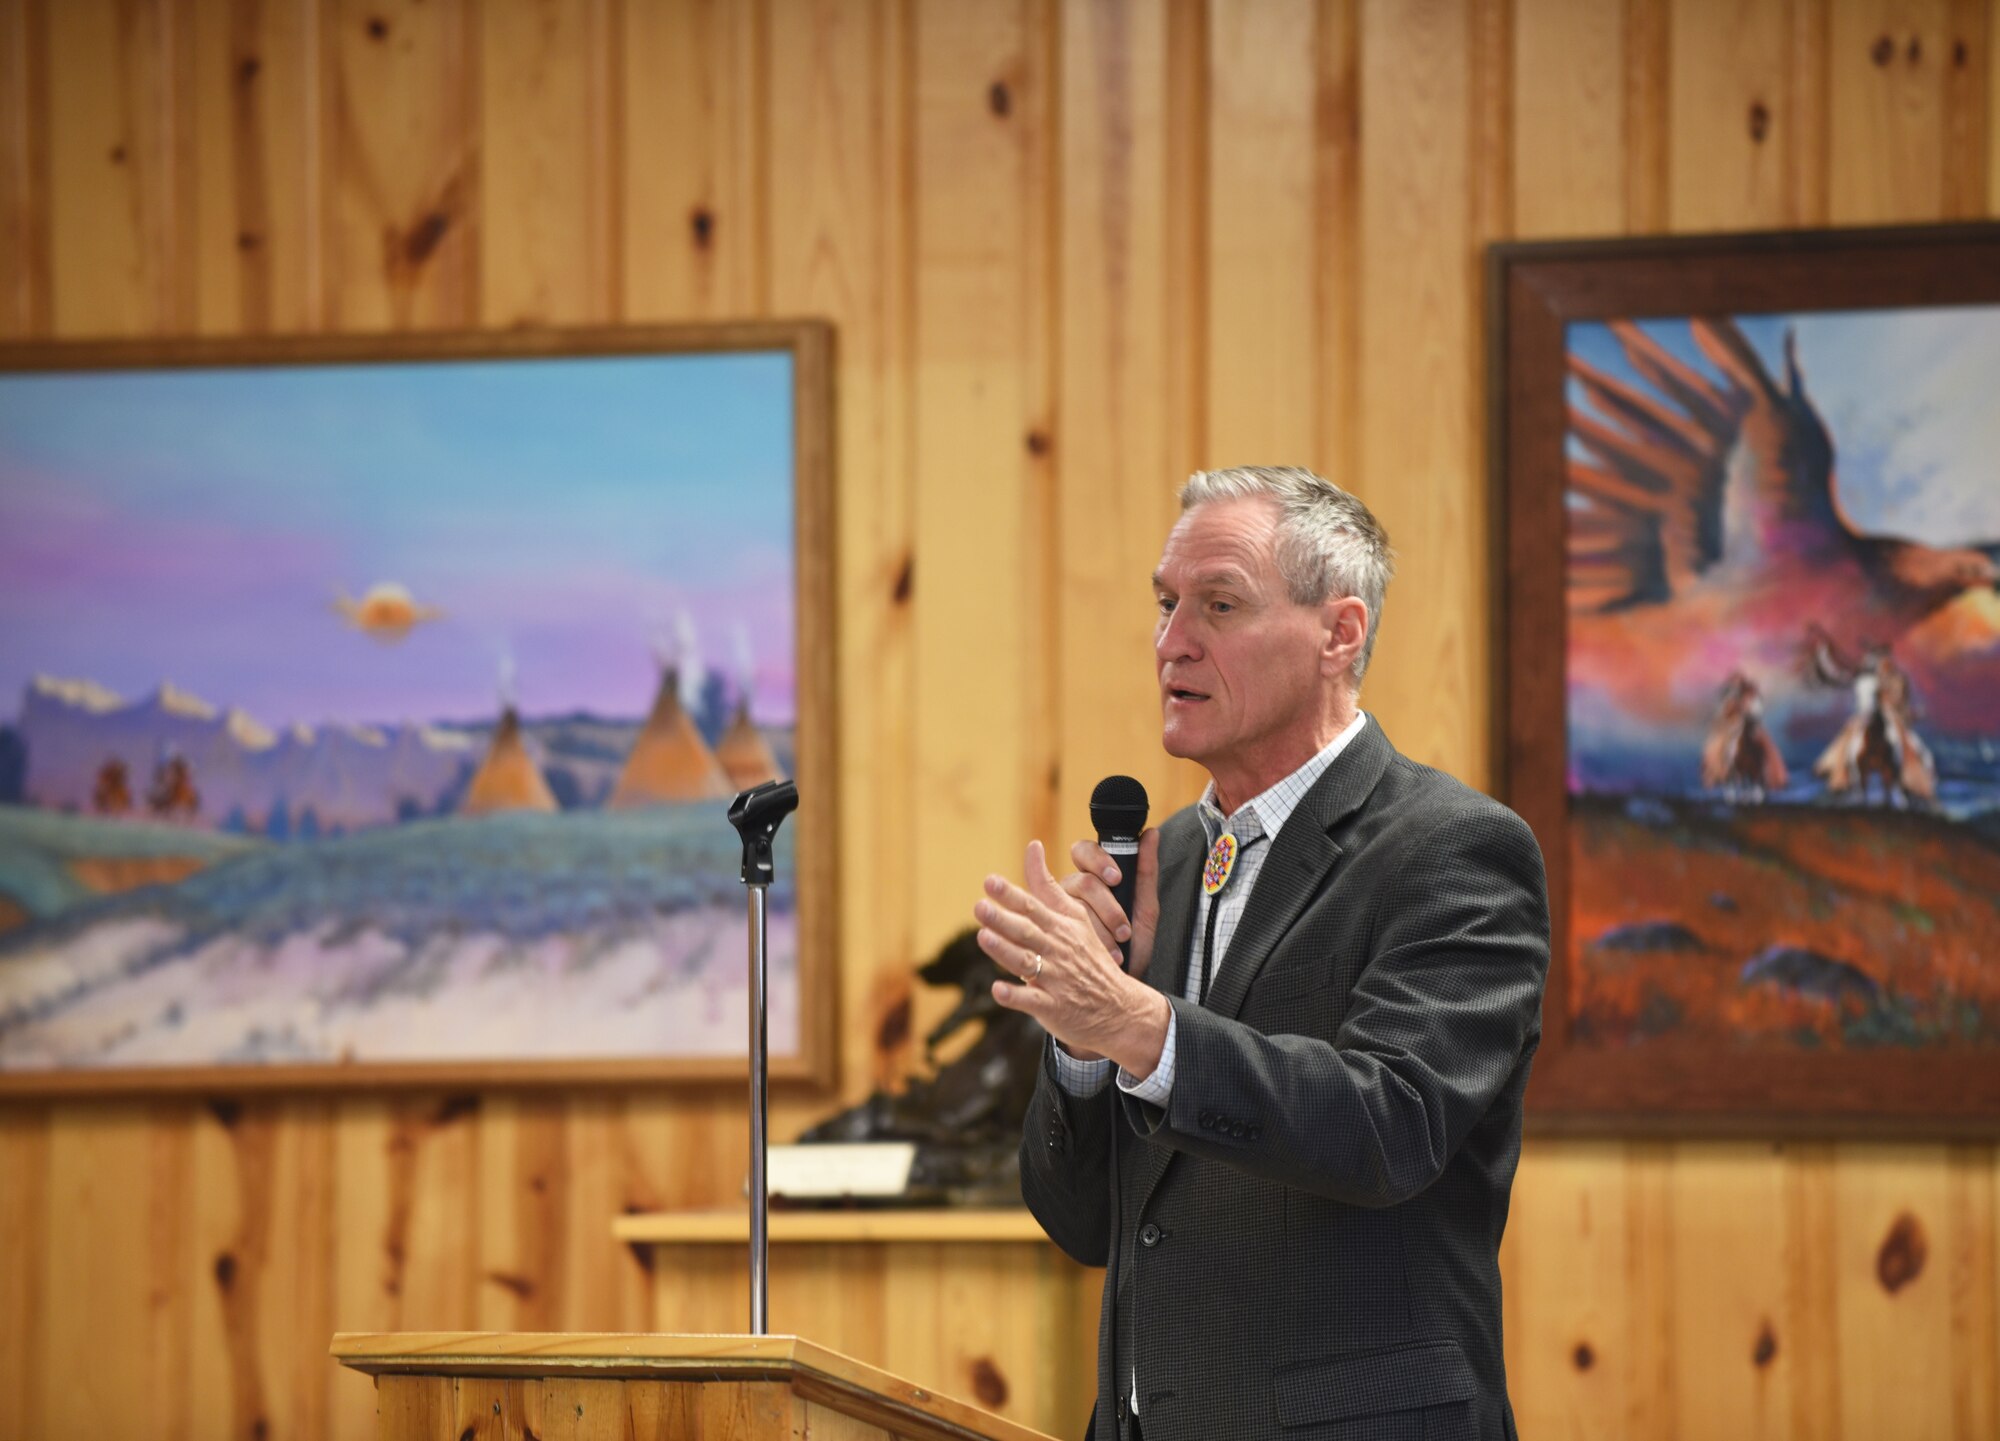 South Dakota Governor Dennis M. Daugaard addresses attendees at the 2018 Governors' Interstate Indian Council assembly at the Crazy Horse Memorial in Custer County, S.D., Sept. 26, 2018. Daugaard spoke about prioritizing tribal relations and the importance of communicating with the tribal community in South Dakota. (U.S. Air Force photo by Airman Christina M. Bennett)